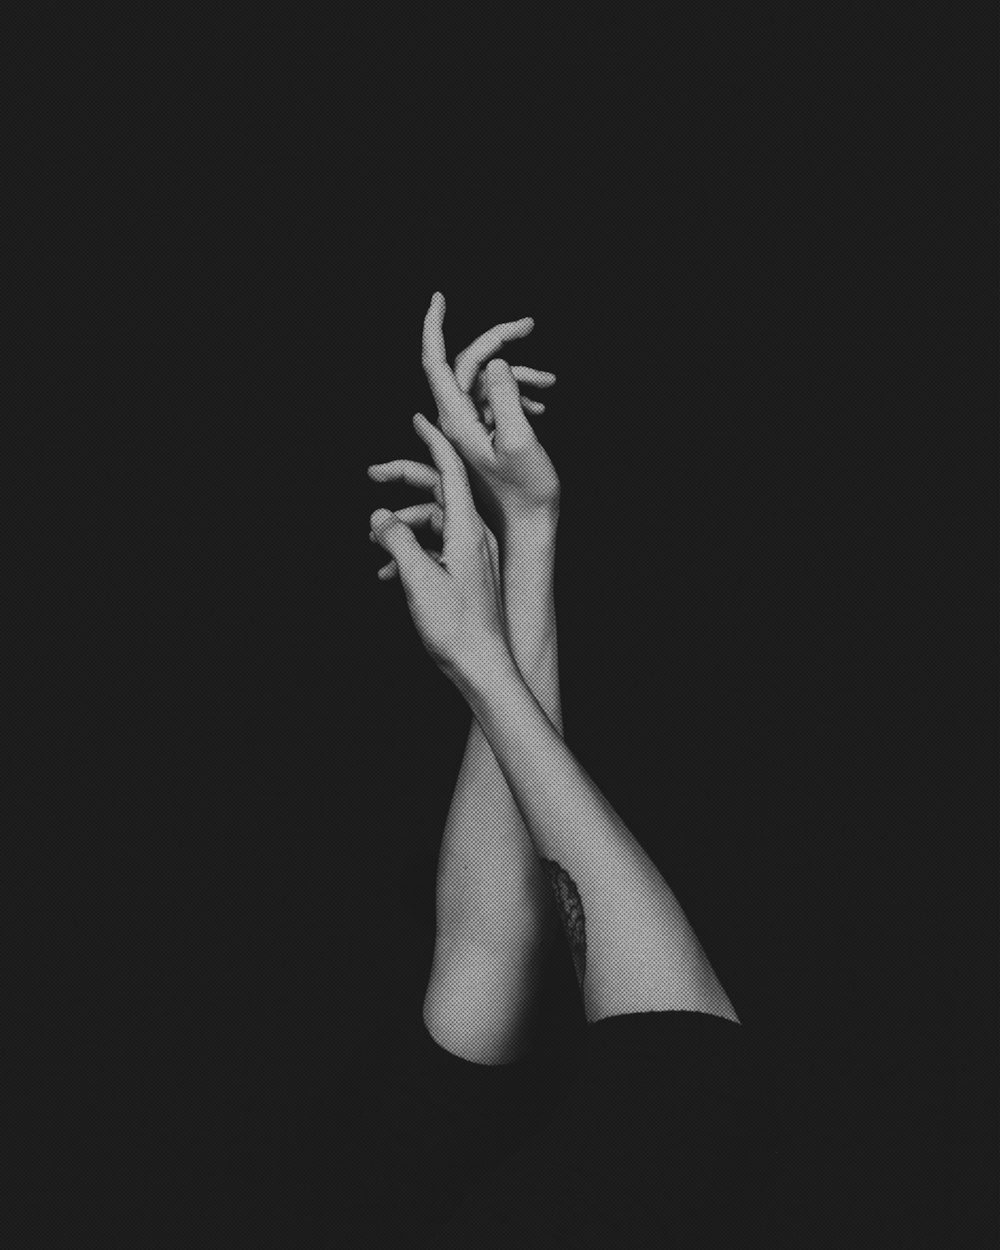 a woman's hands reaching up into the air